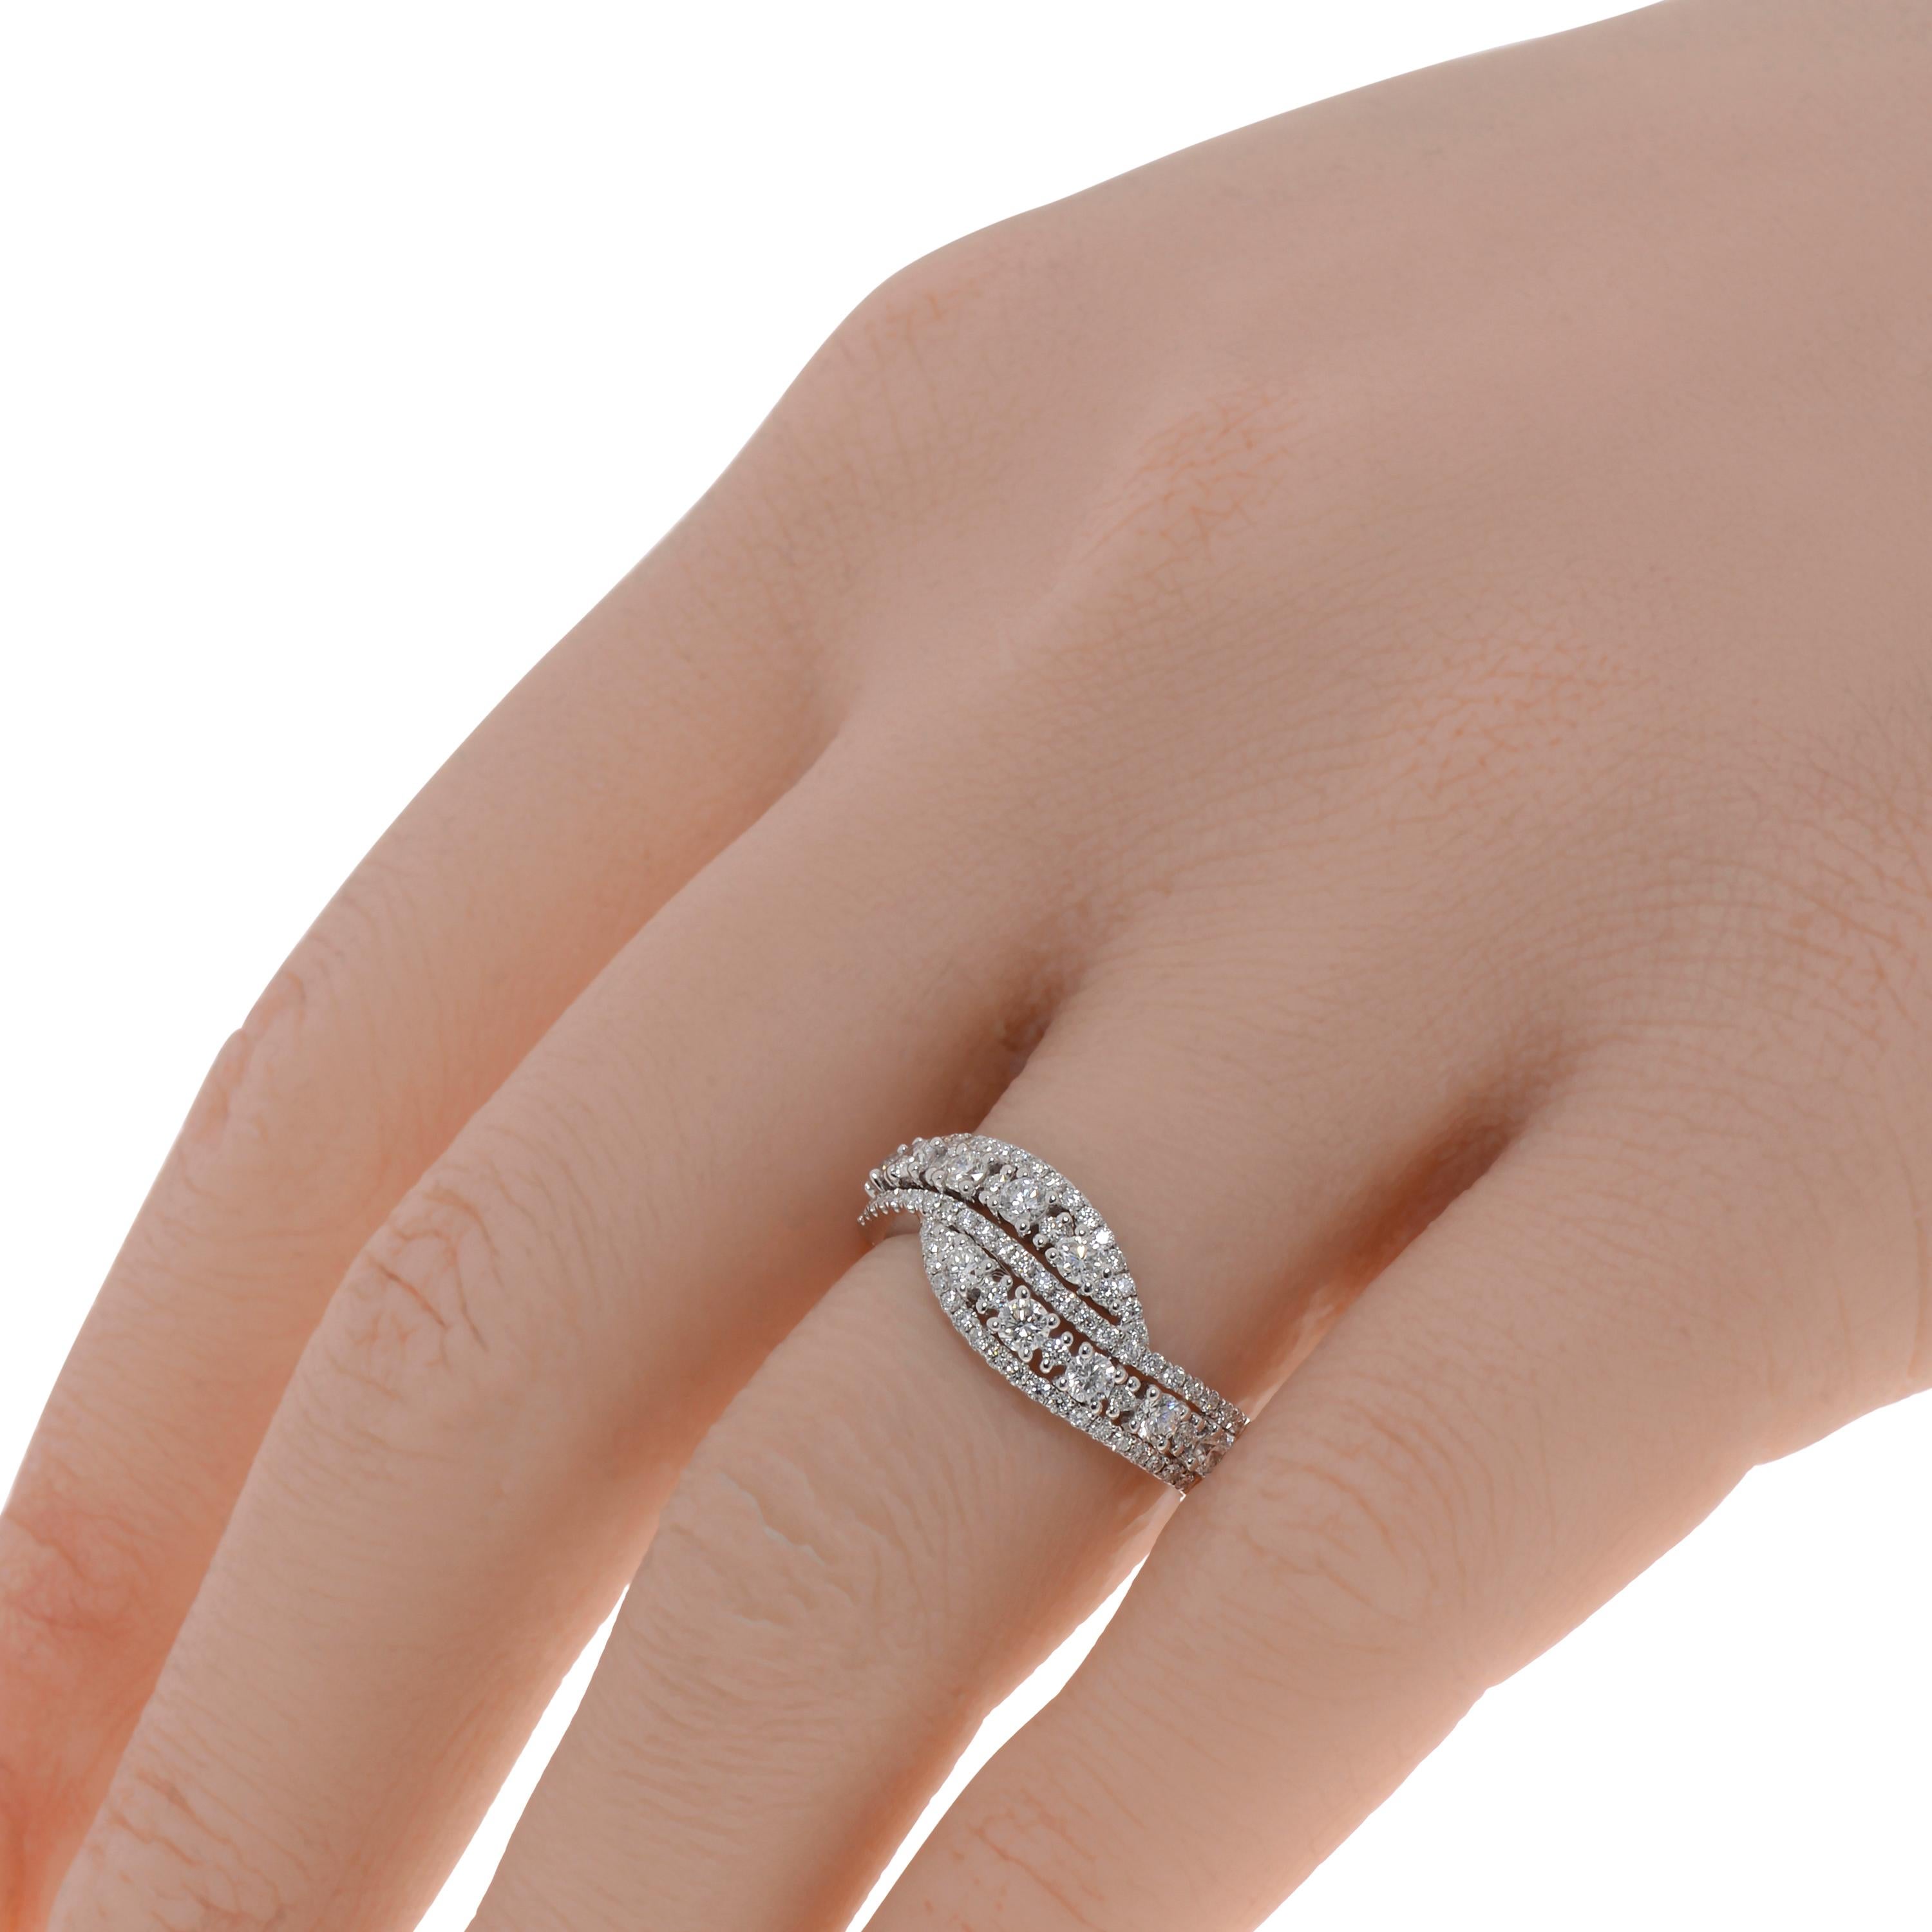 This show-stopping Piero Milano 18K White Gold Crossover Ring features glistening waves of pave elevated with shiny centers of prong set diamonds 0.76ct. tw.. The ring size is 6.25 (52.5). The Band Width is 8.1mm. The Weight is 4.3g. Diamond Color: